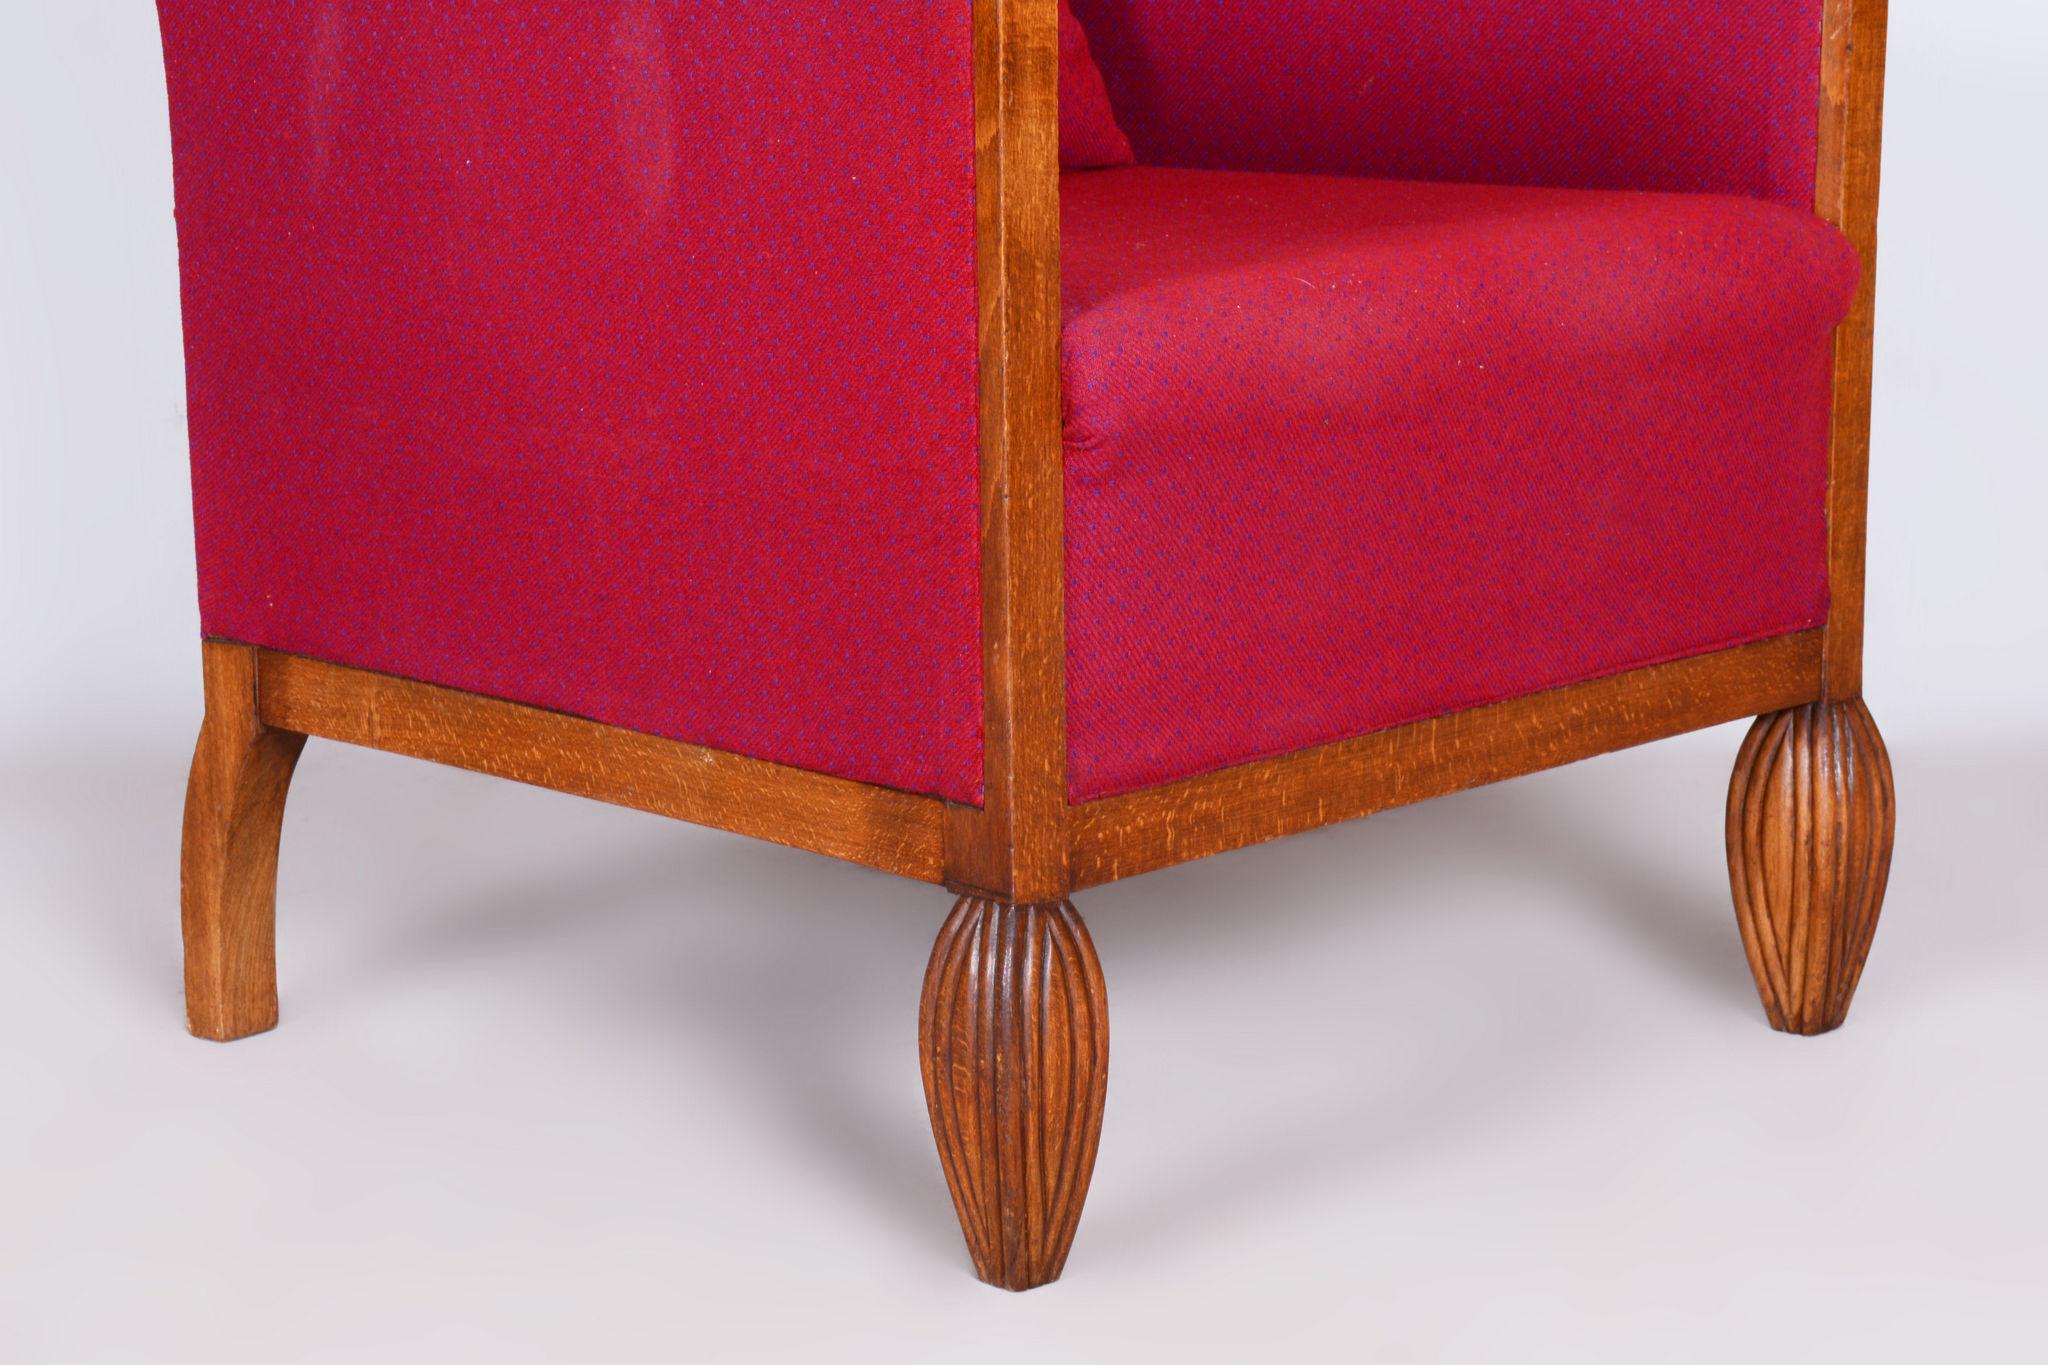 French Restored Art Deco Red Armchair, Beech, Original Upholstery, France, 1930s For Sale